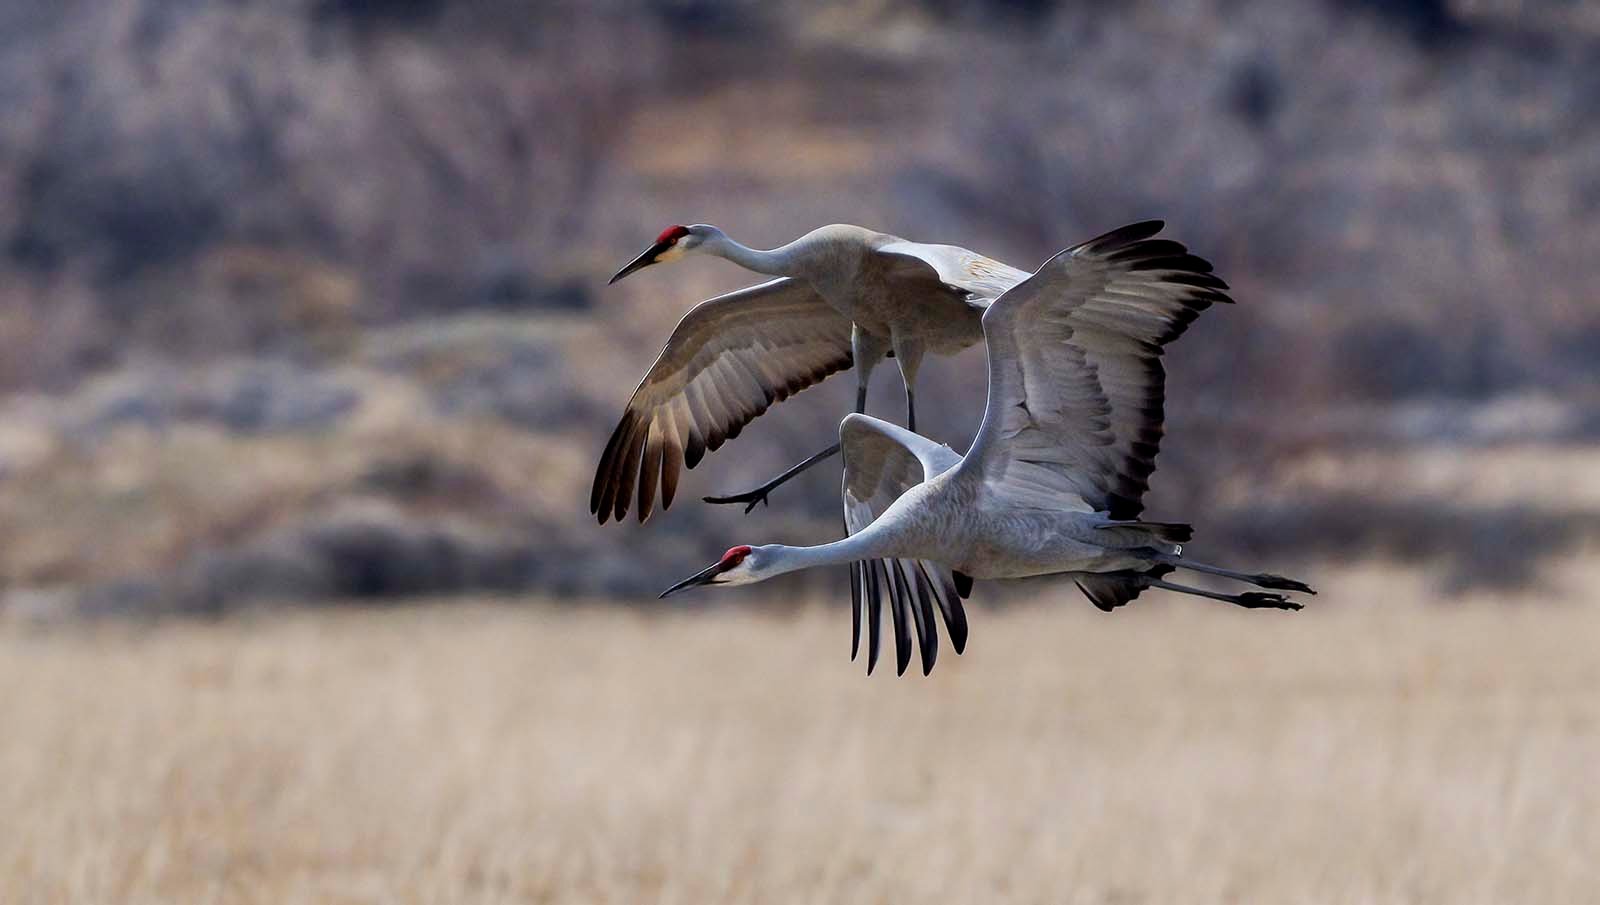 A pair of sandhill cranes take flight. The tallest bird in the Greater Yellowstone Region, cranes have a distinctive call and bright red forehead. Photo by Rob Koelling.